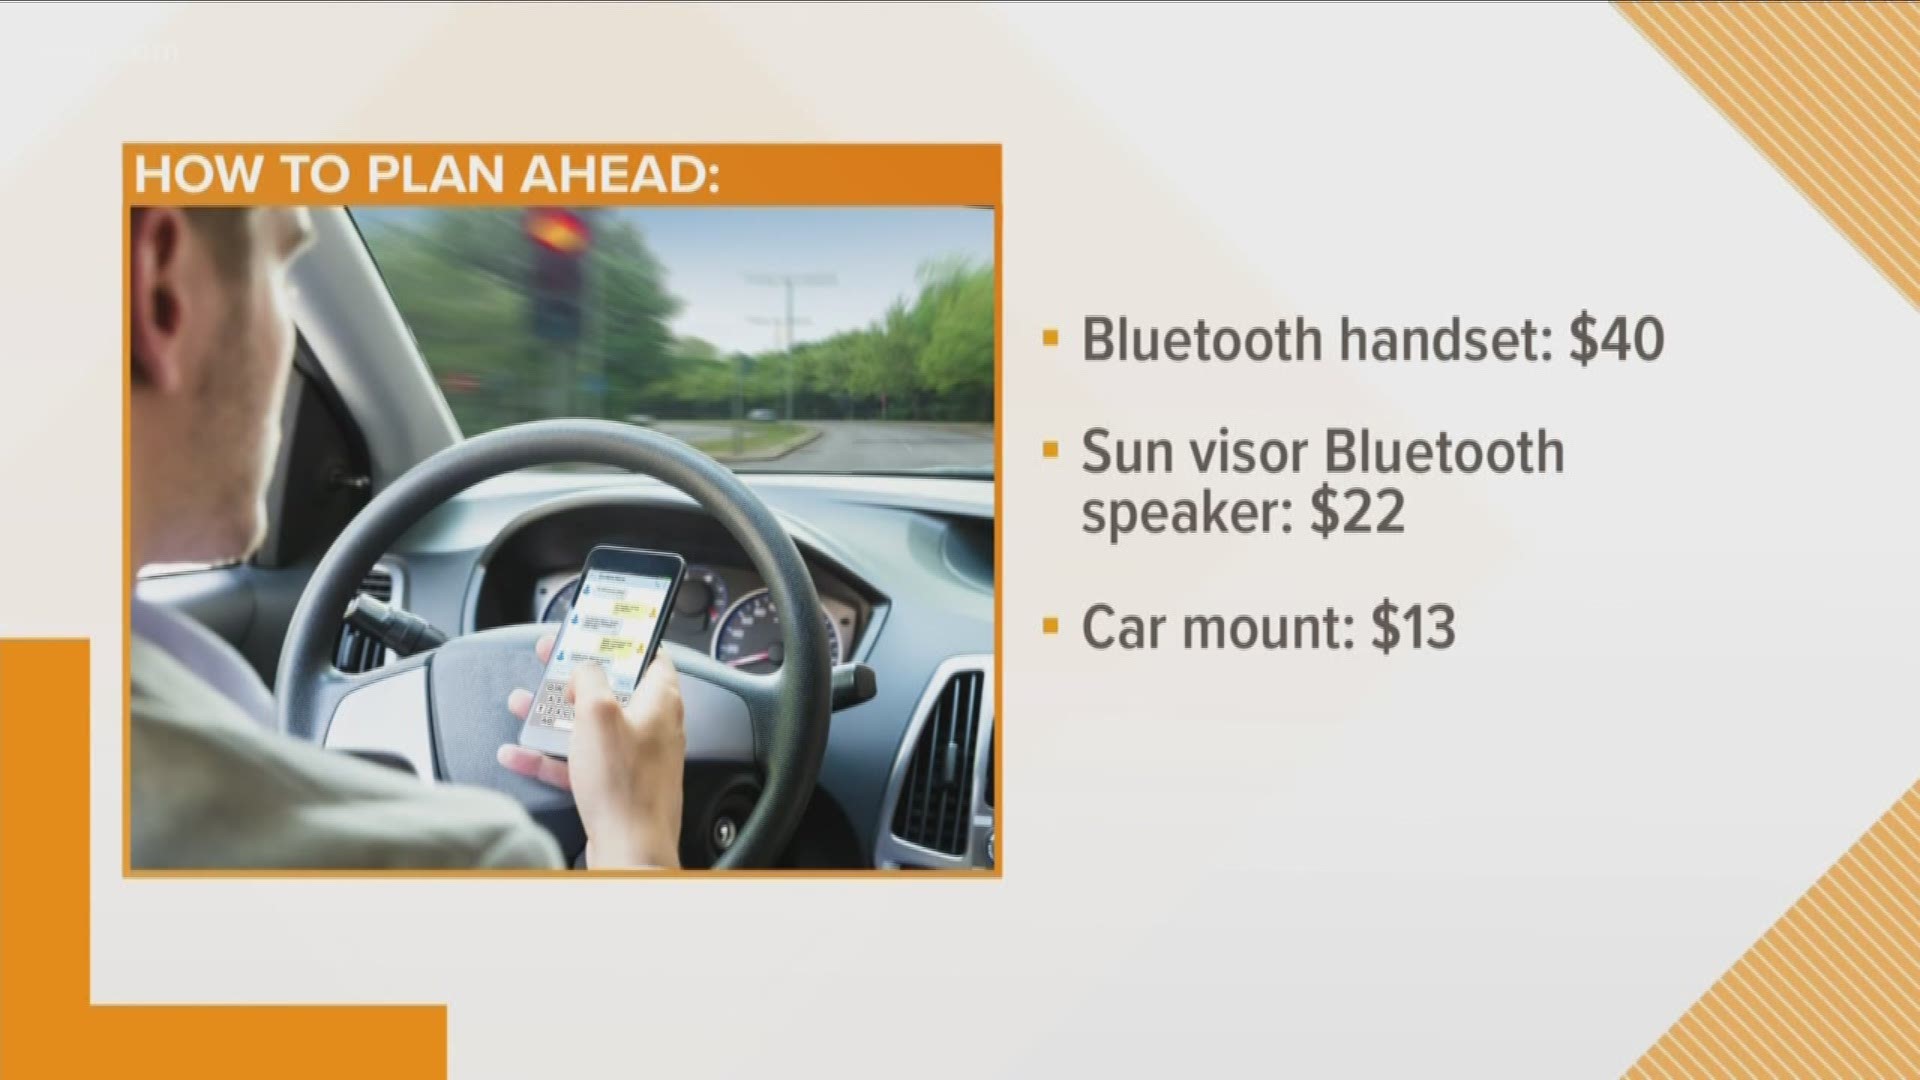 It could soon be illegal for Tennessee drivers to talk on a phone without a hands-free device. 10News Reporter Katie Inman explains how this could cut down on distracted driving.